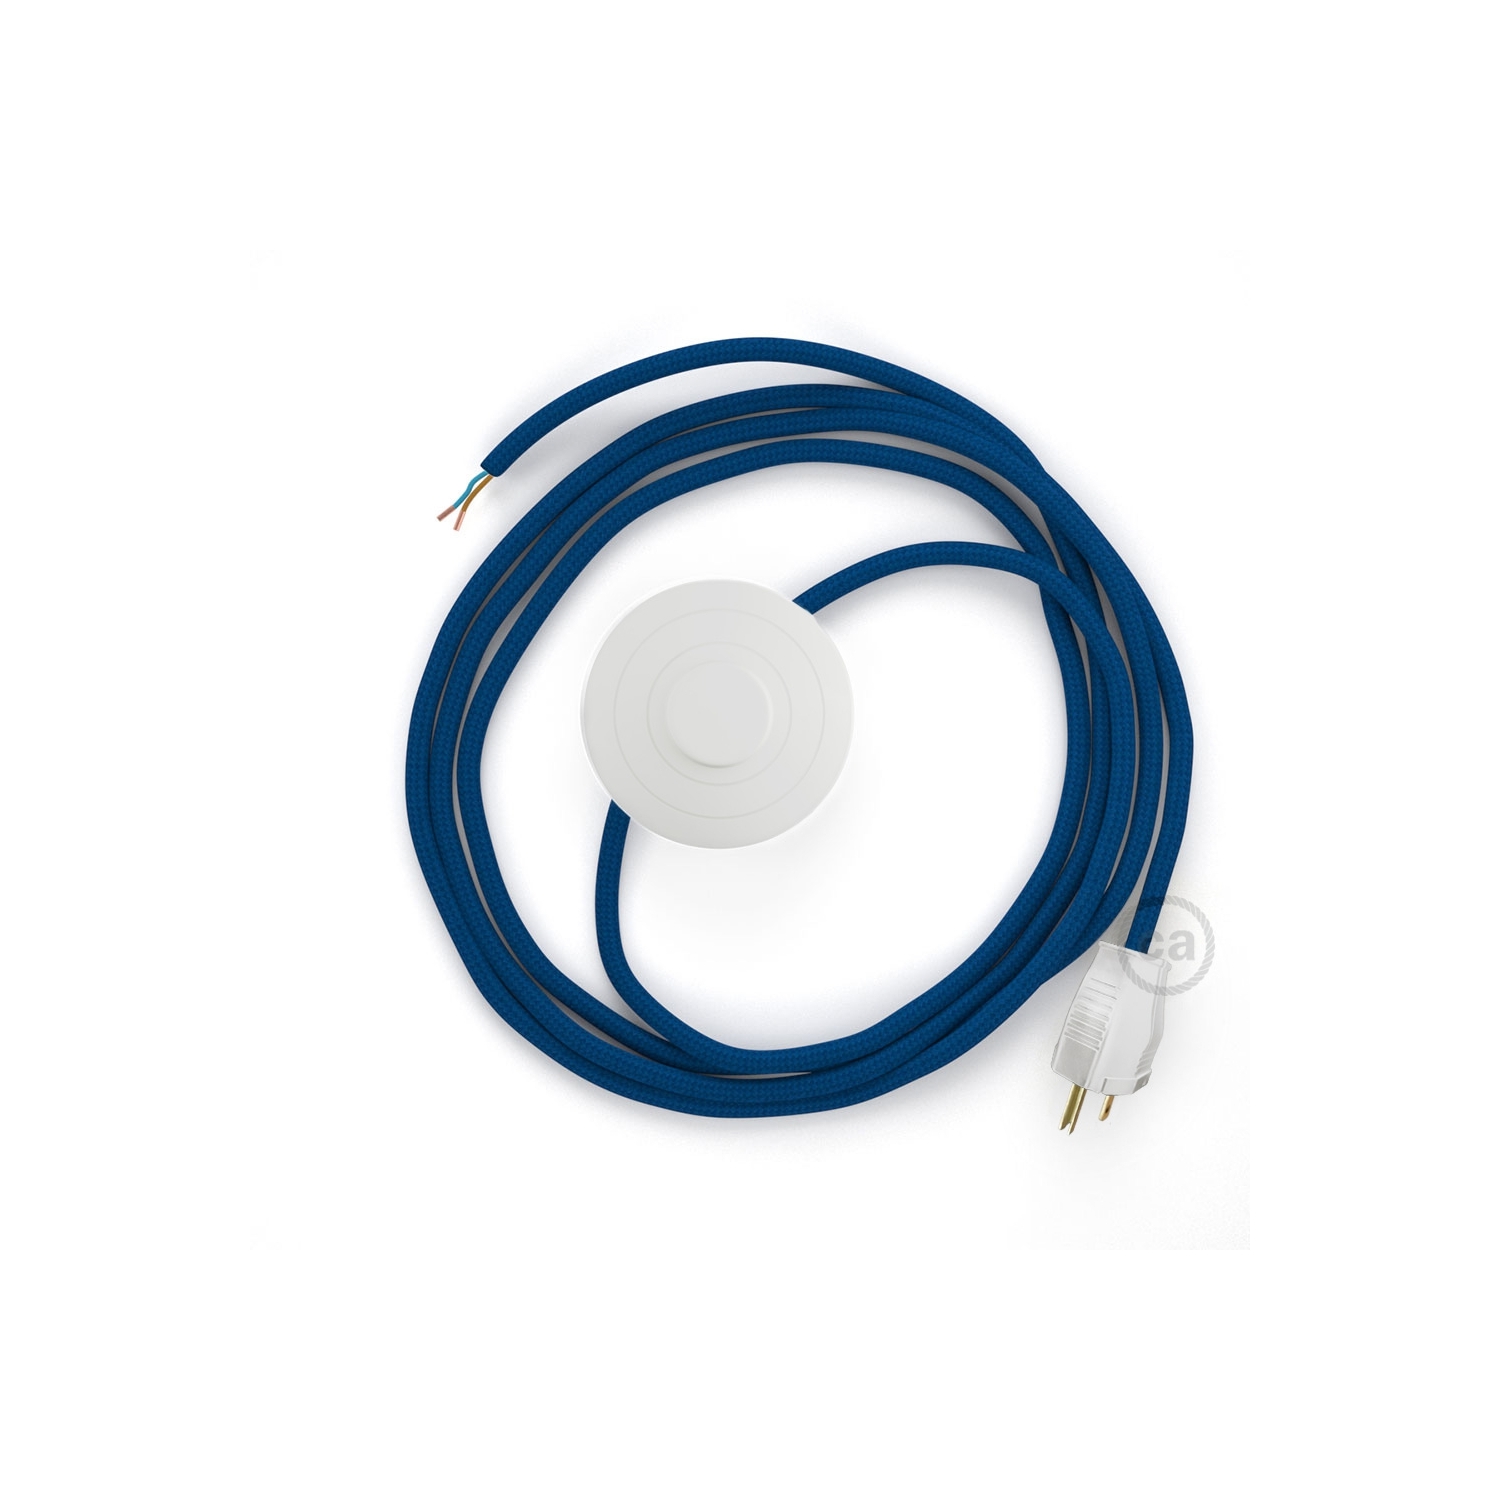 Power Cord with foot switch, RM12 Blue Rayon - Choose color of switch/plug